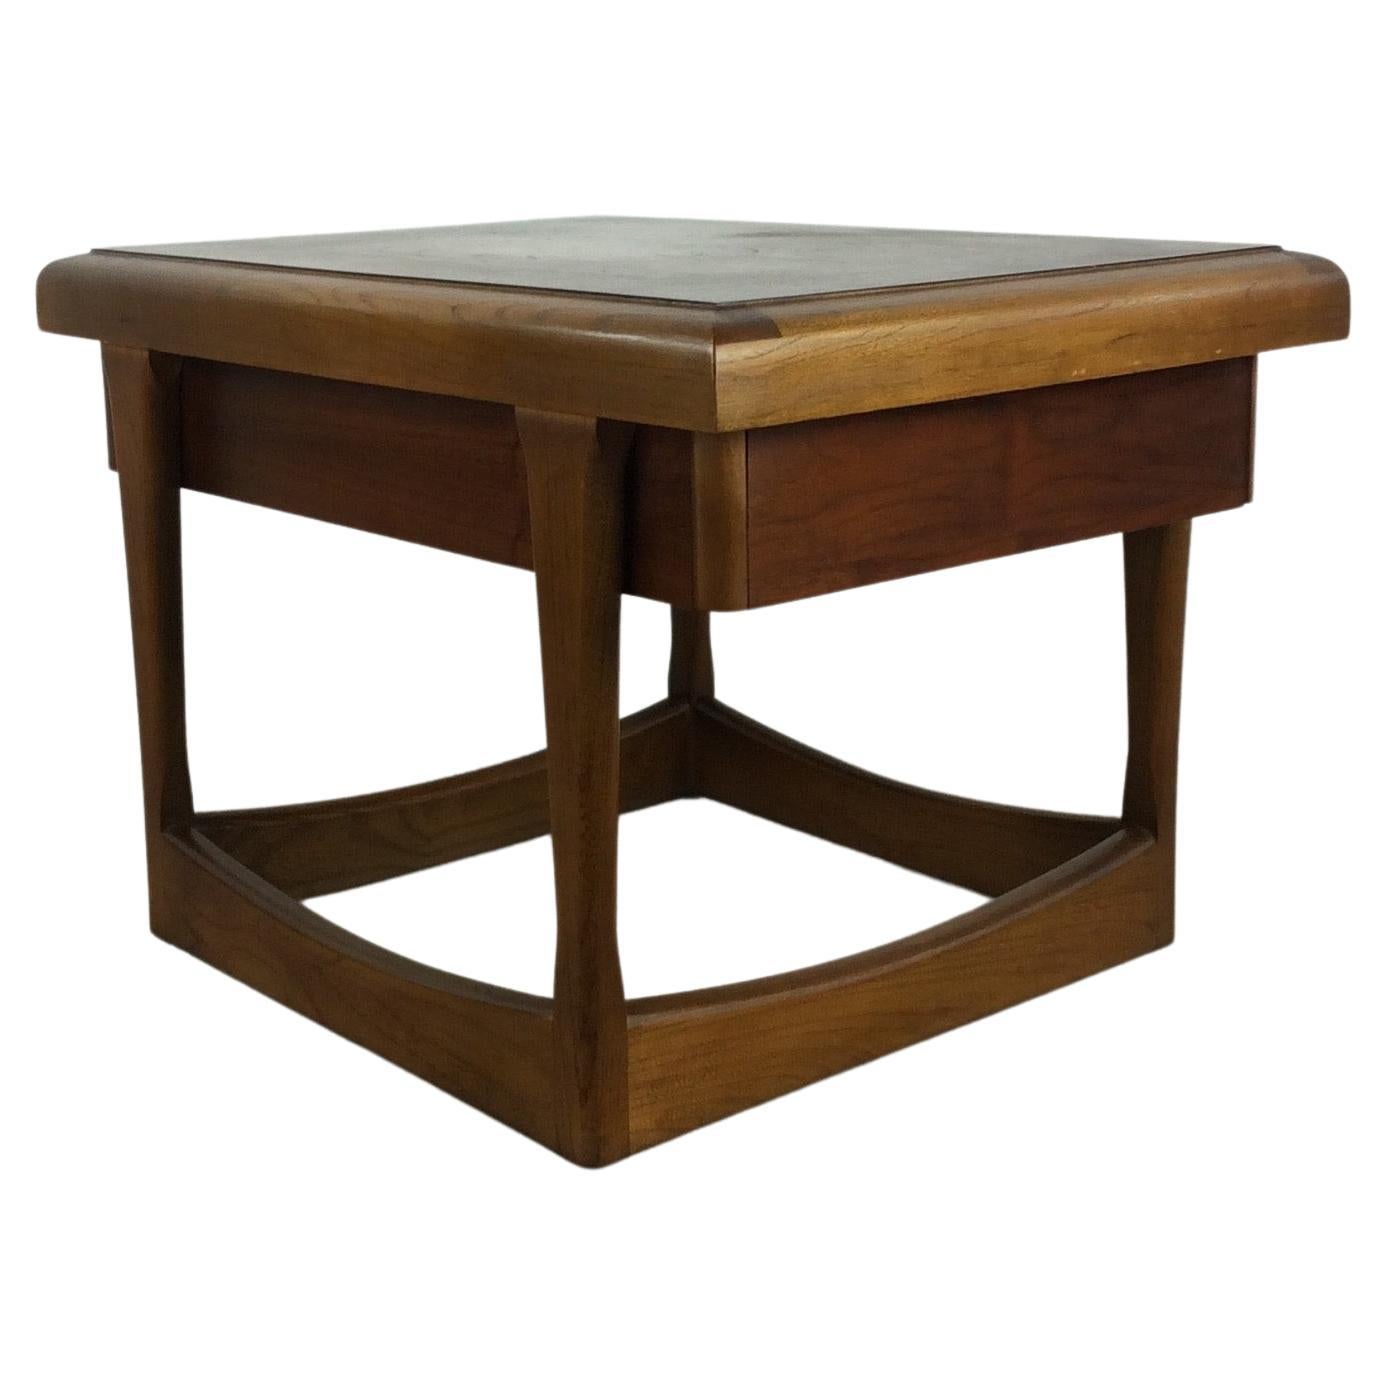 Mid-Century Modern End Table with Drawer by Lane Furniture